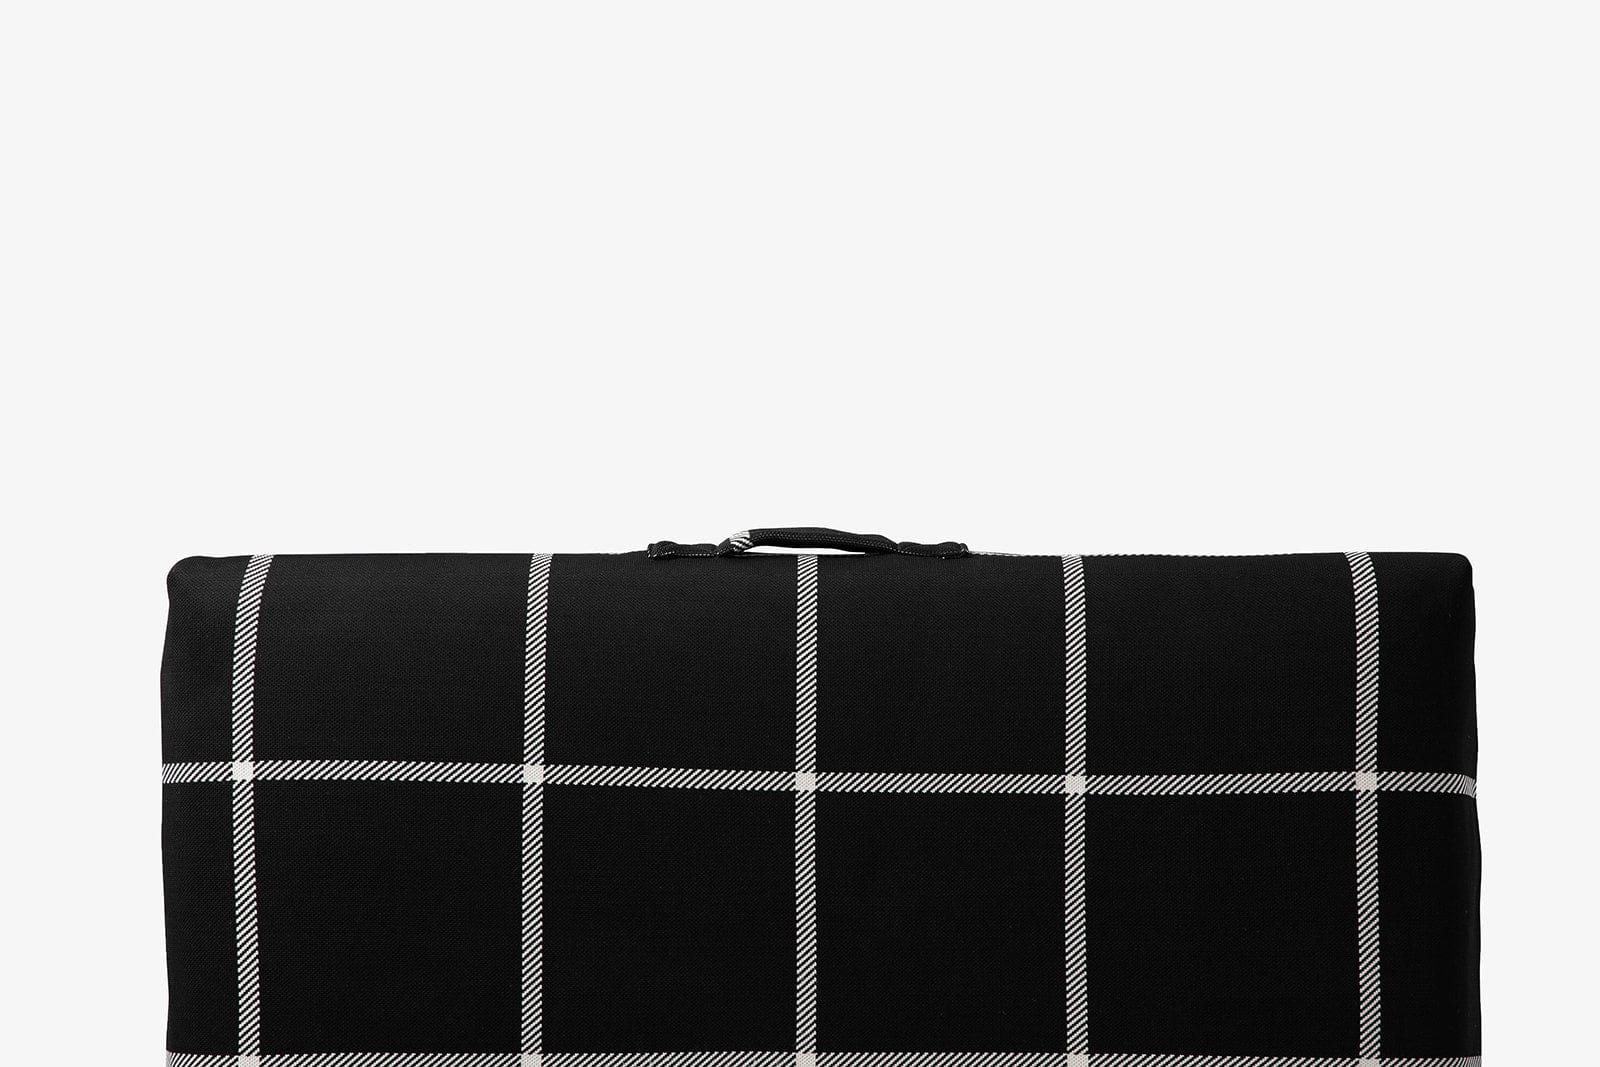 Laylo Pets LAY LO Pets - Black Plaid Dog Bed or Bed Cover Lay Lo Pets